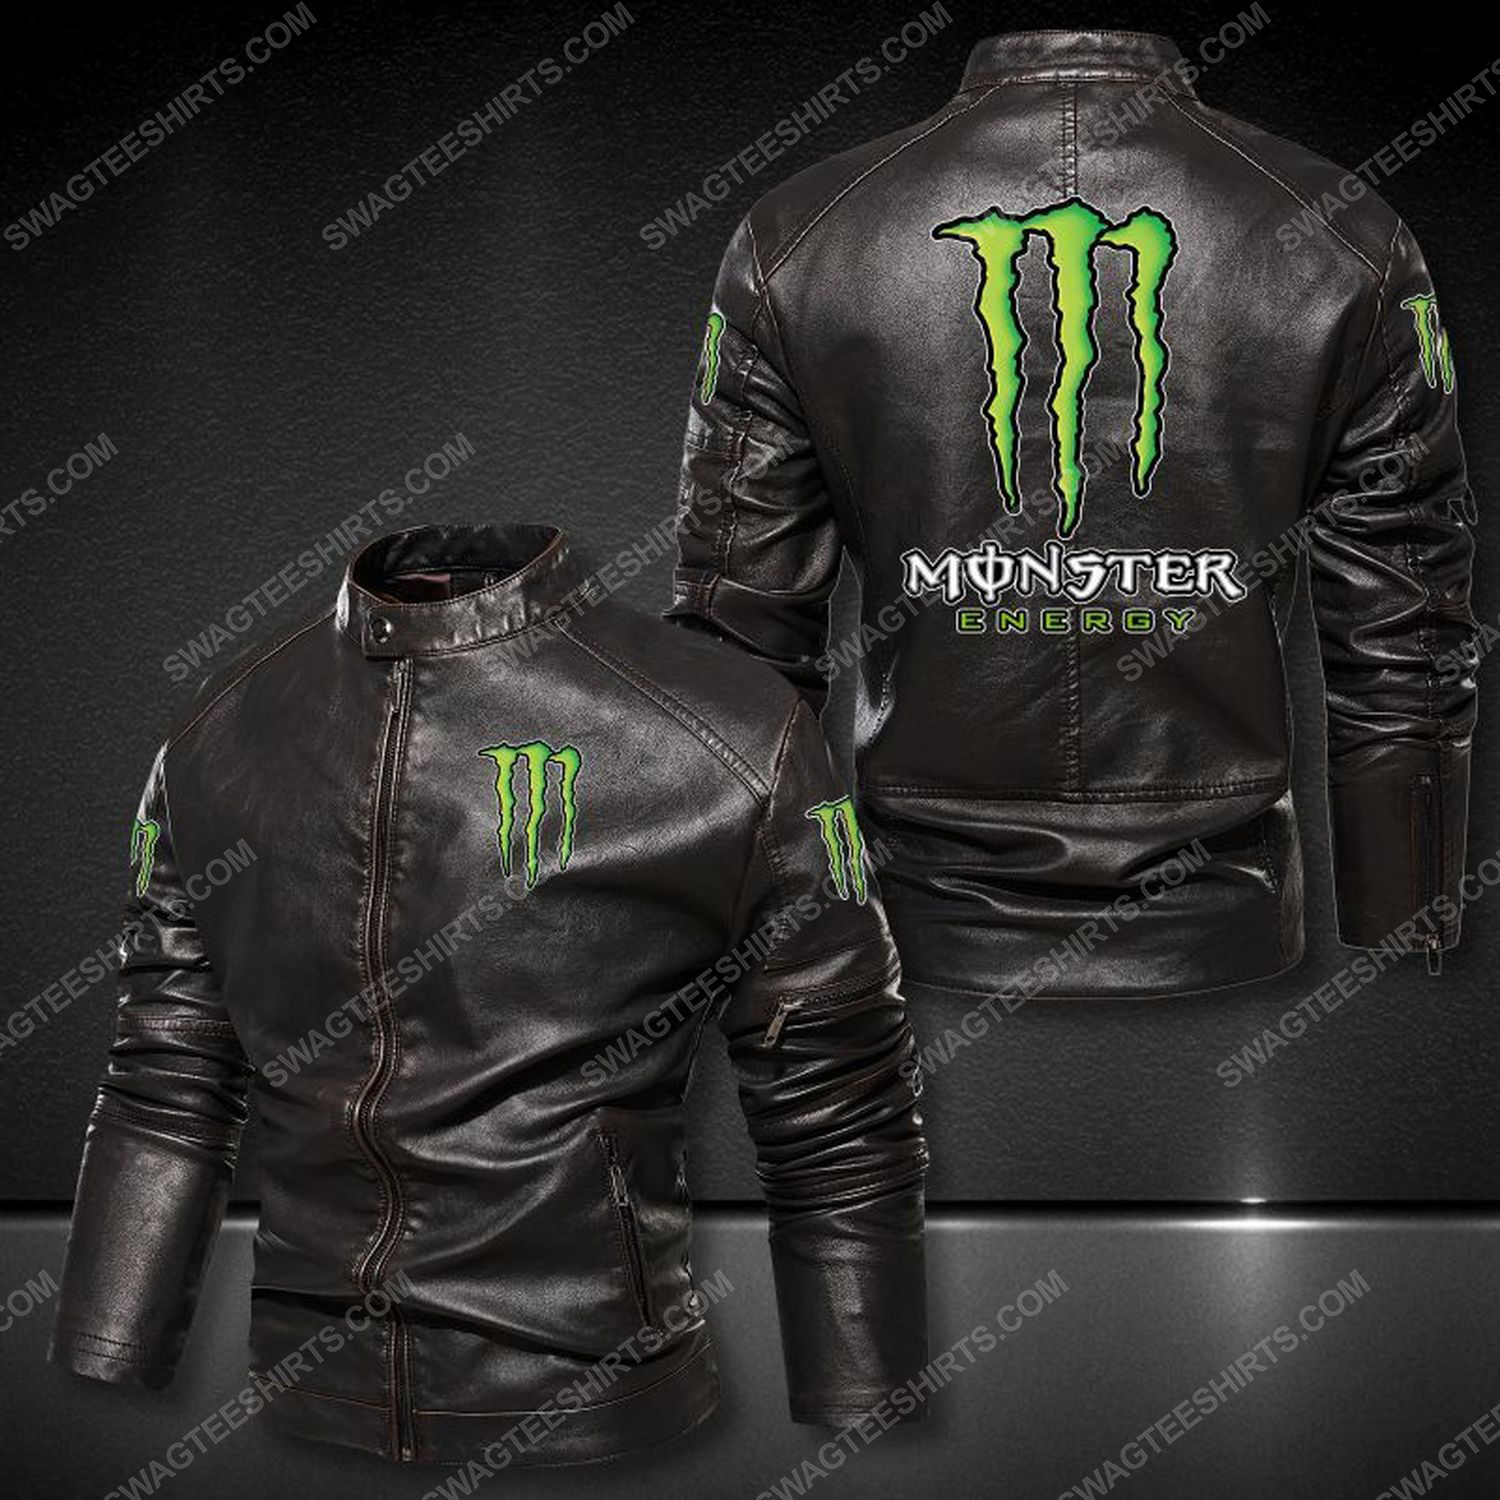 Monster energy drink leather jacket 1 - Copy